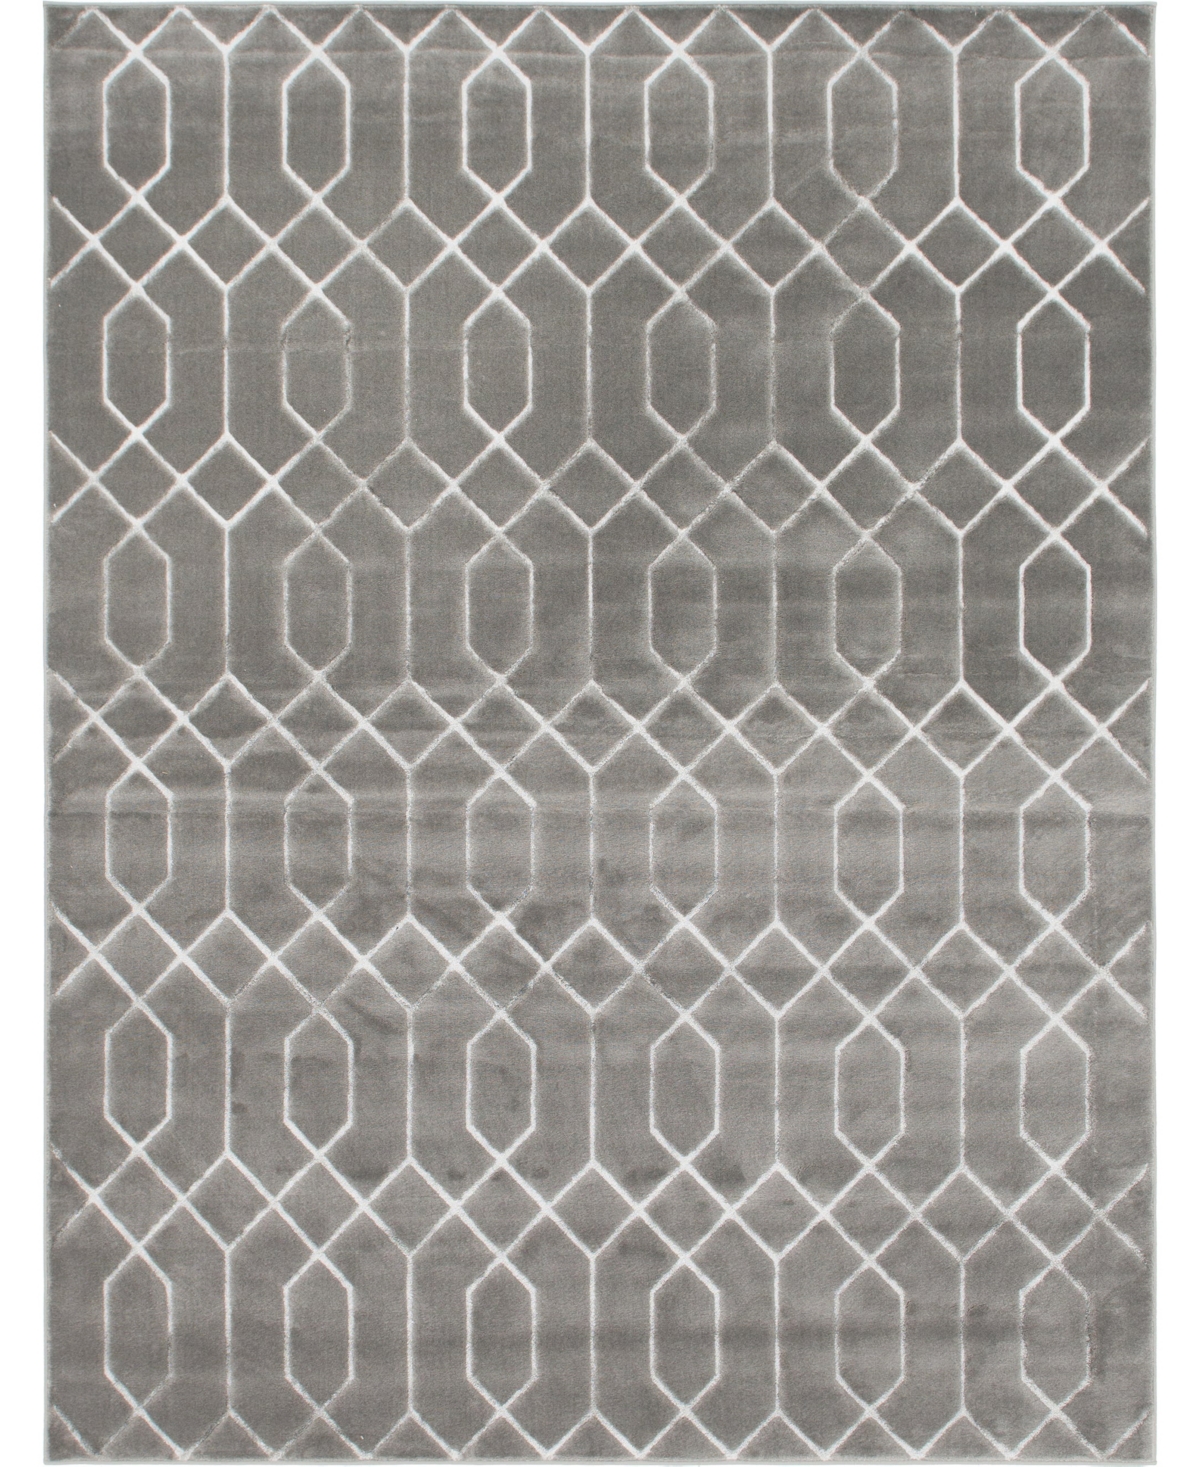 Marilyn Monroe Glam Mmg001 8' X 10' Area Rug In Gray Silver